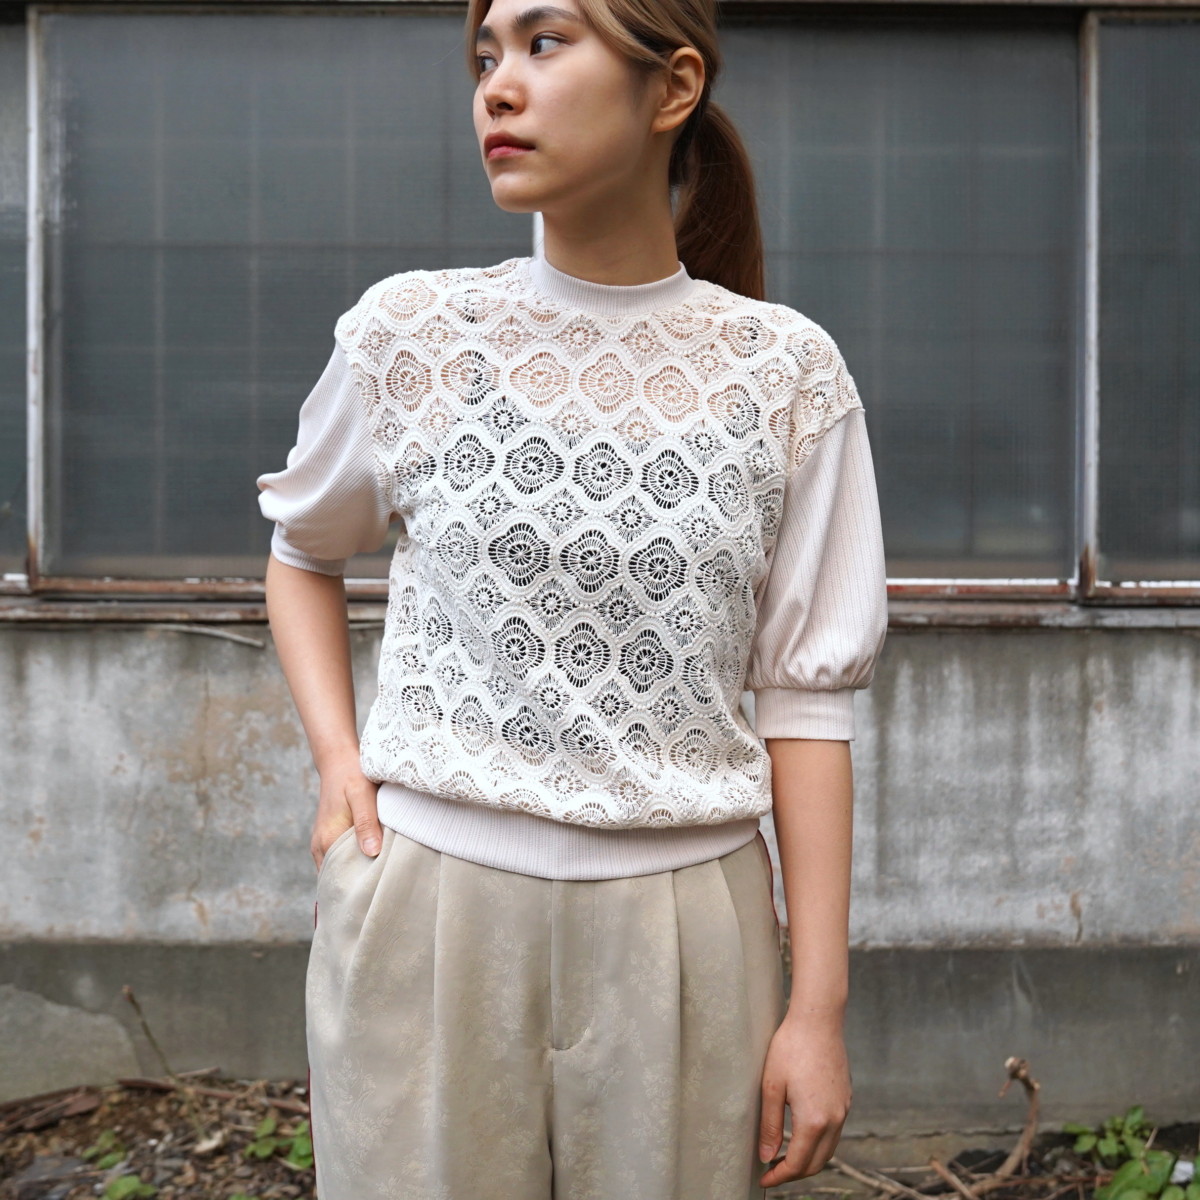 CLANE] COMPACT VINTAGE LACE TOPS – MaW SAPPORO